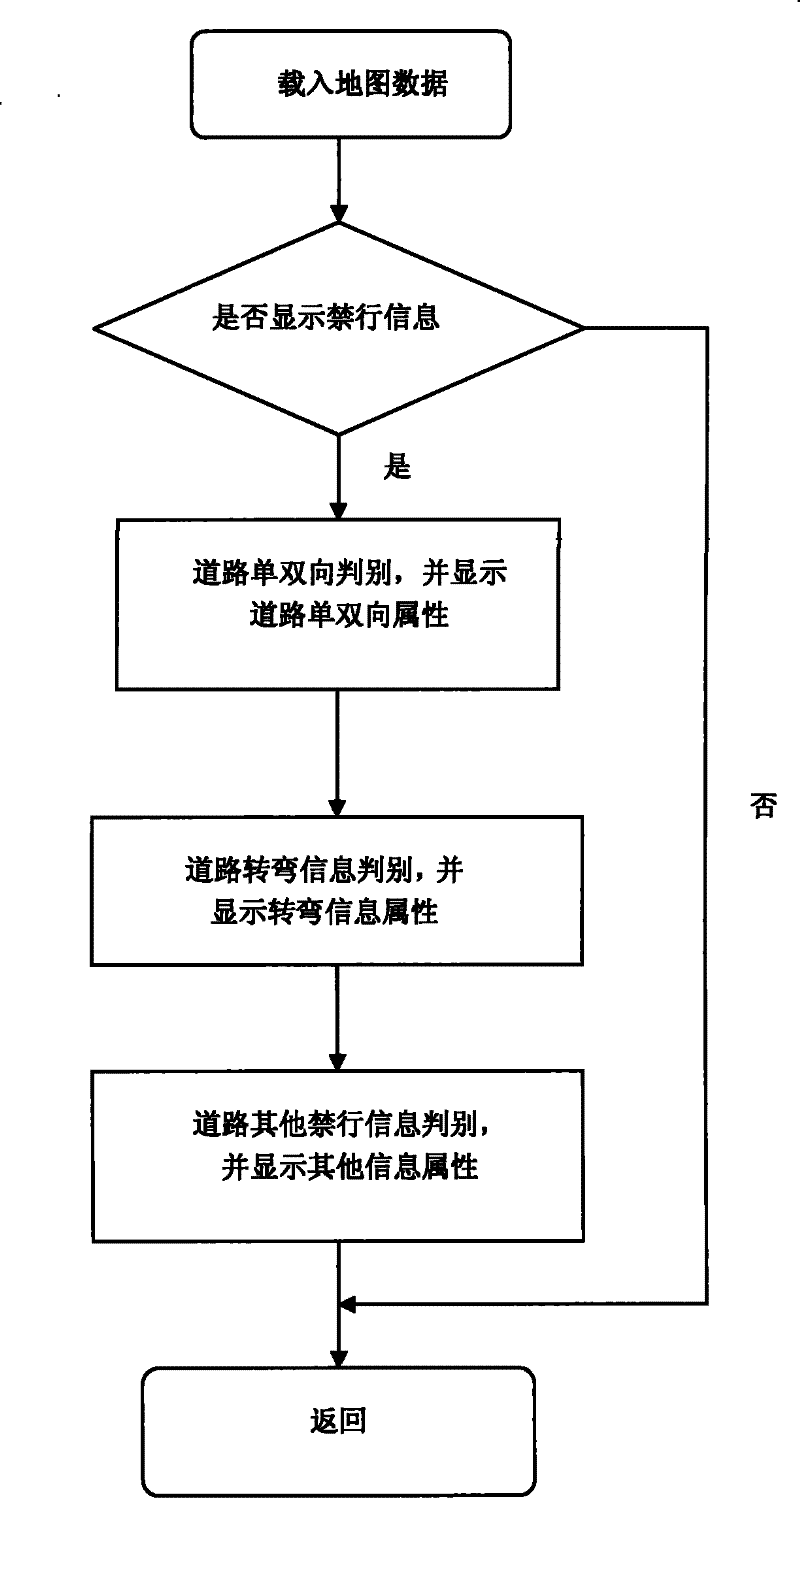 Method for prompting information of road condition of navigational instrument